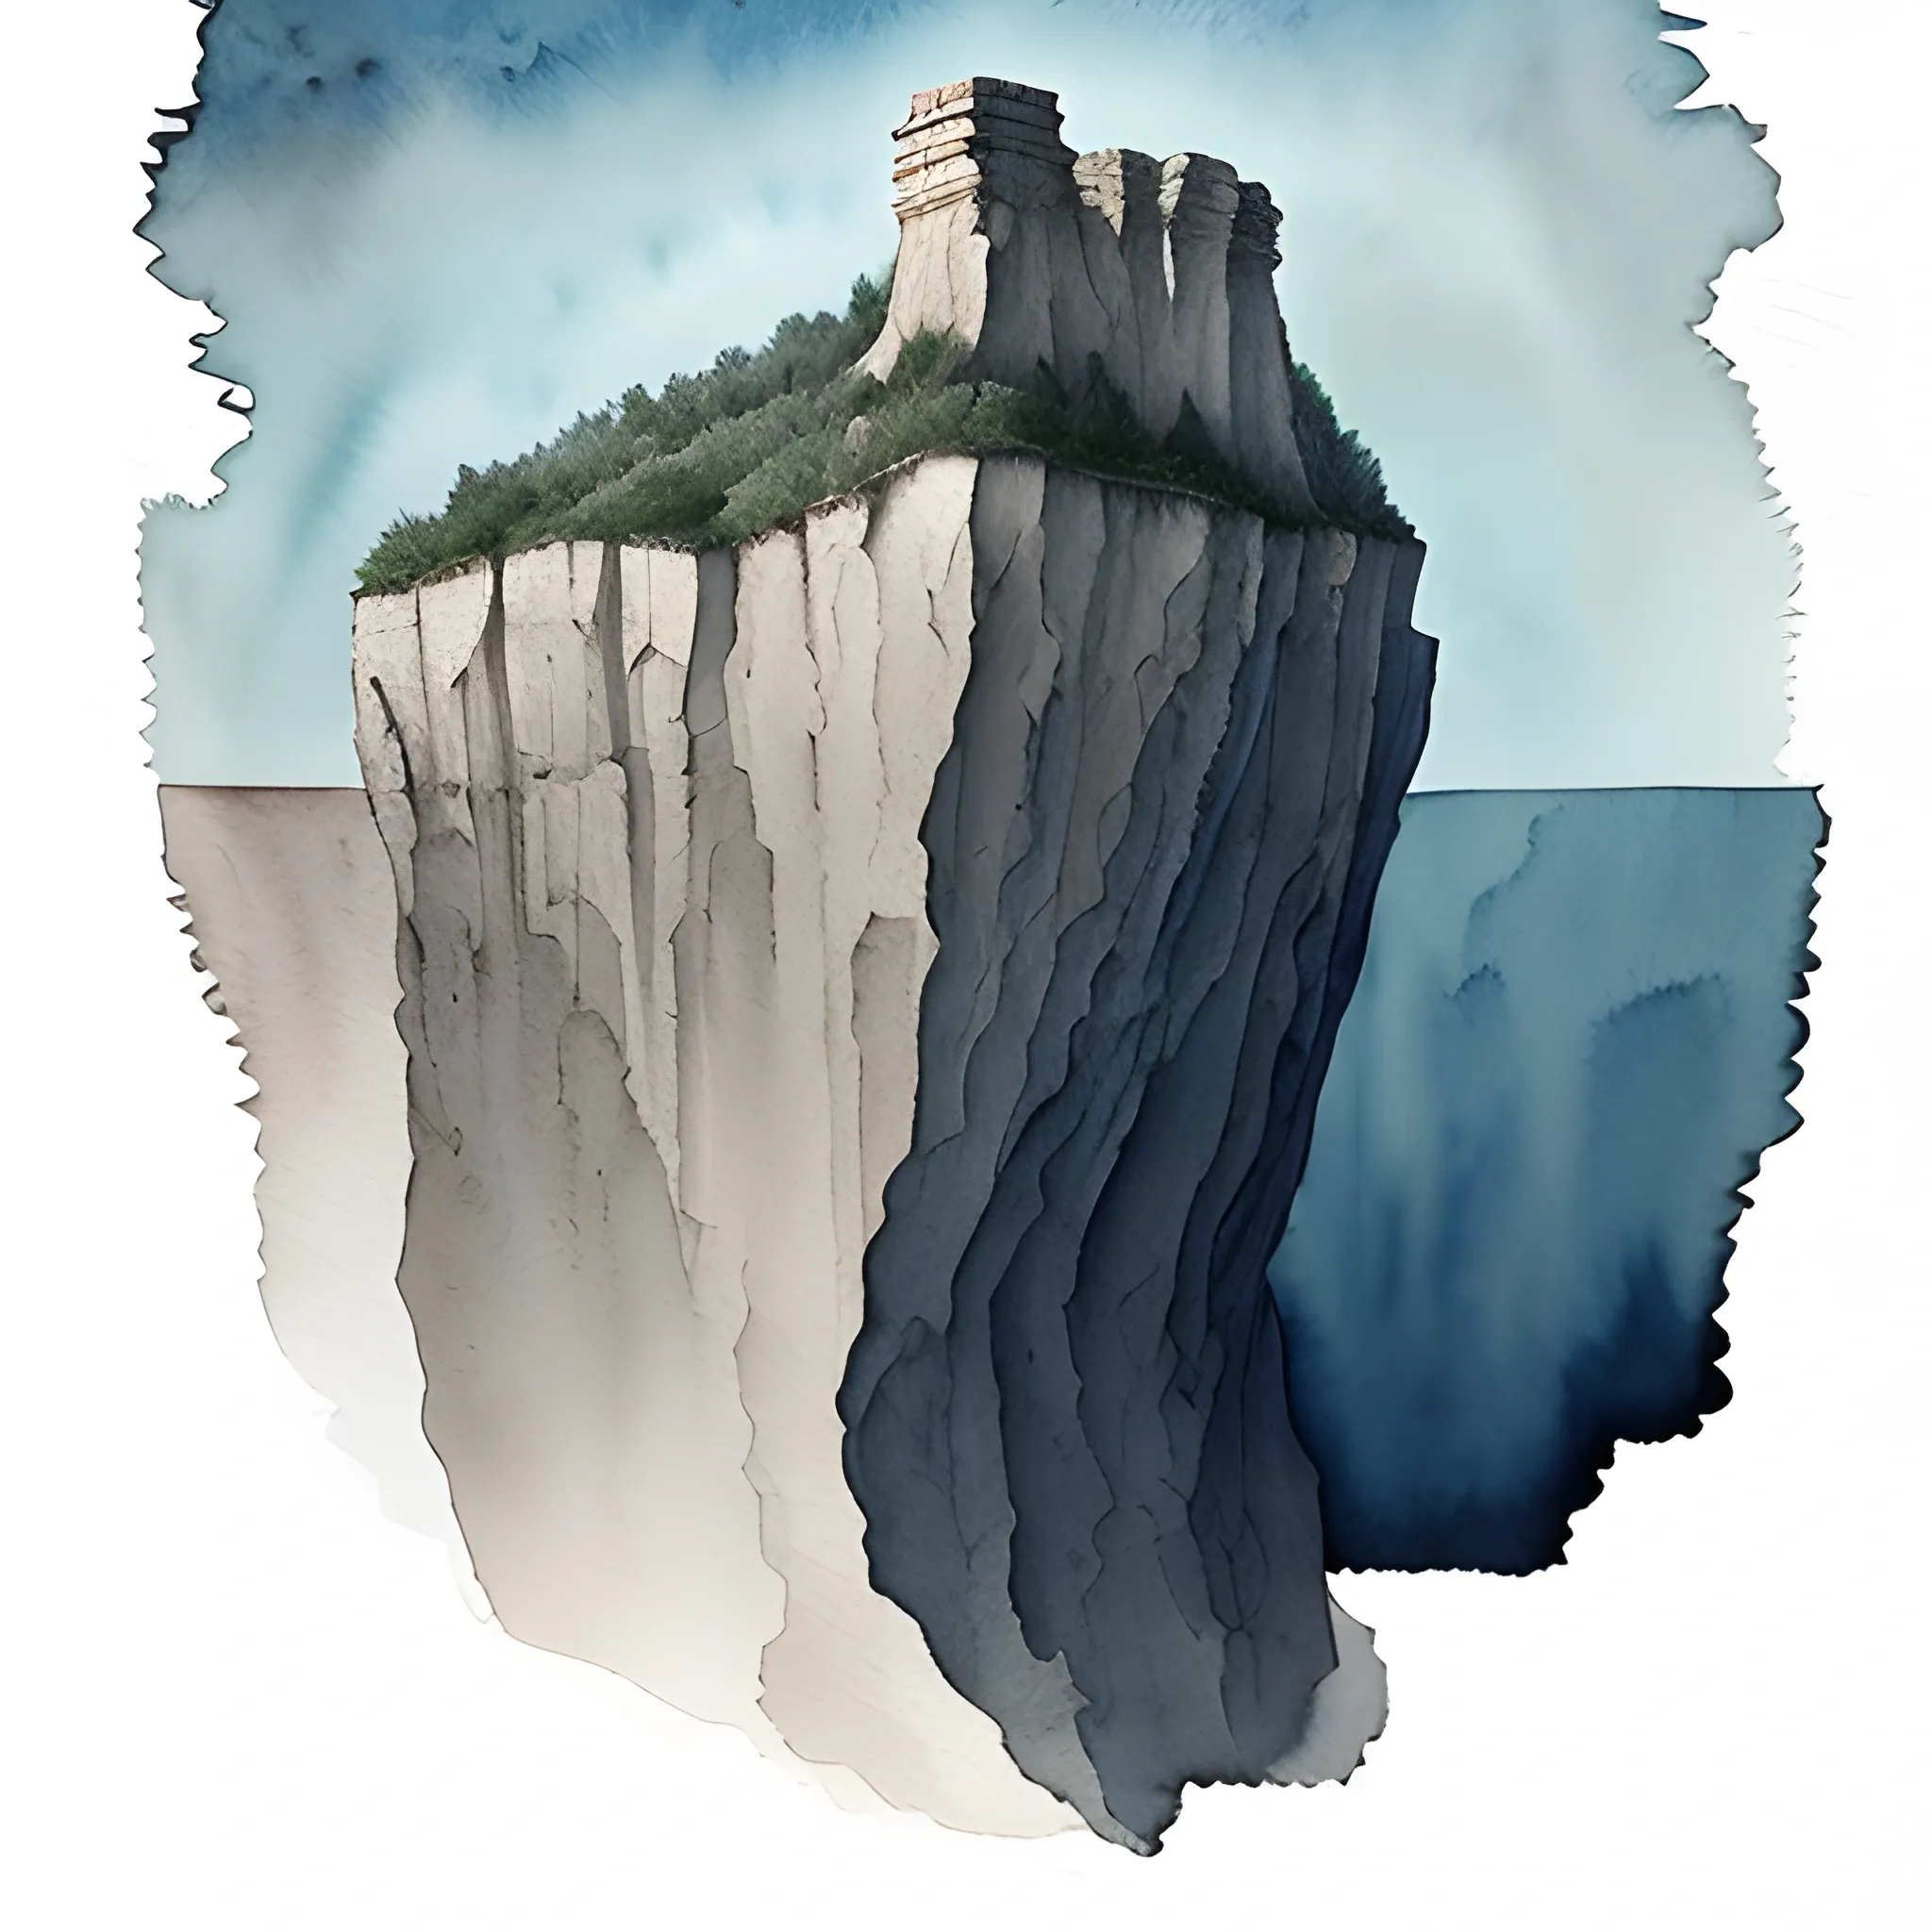 Create a striking watercolor illustration of rugged cliffs, emphasizing the sense of depth and void. Concentrate on the intricate details of the cliffs and the vast emptiness beyond them. Utilize a muted color palette to evoke a feeling of solitude and isolation